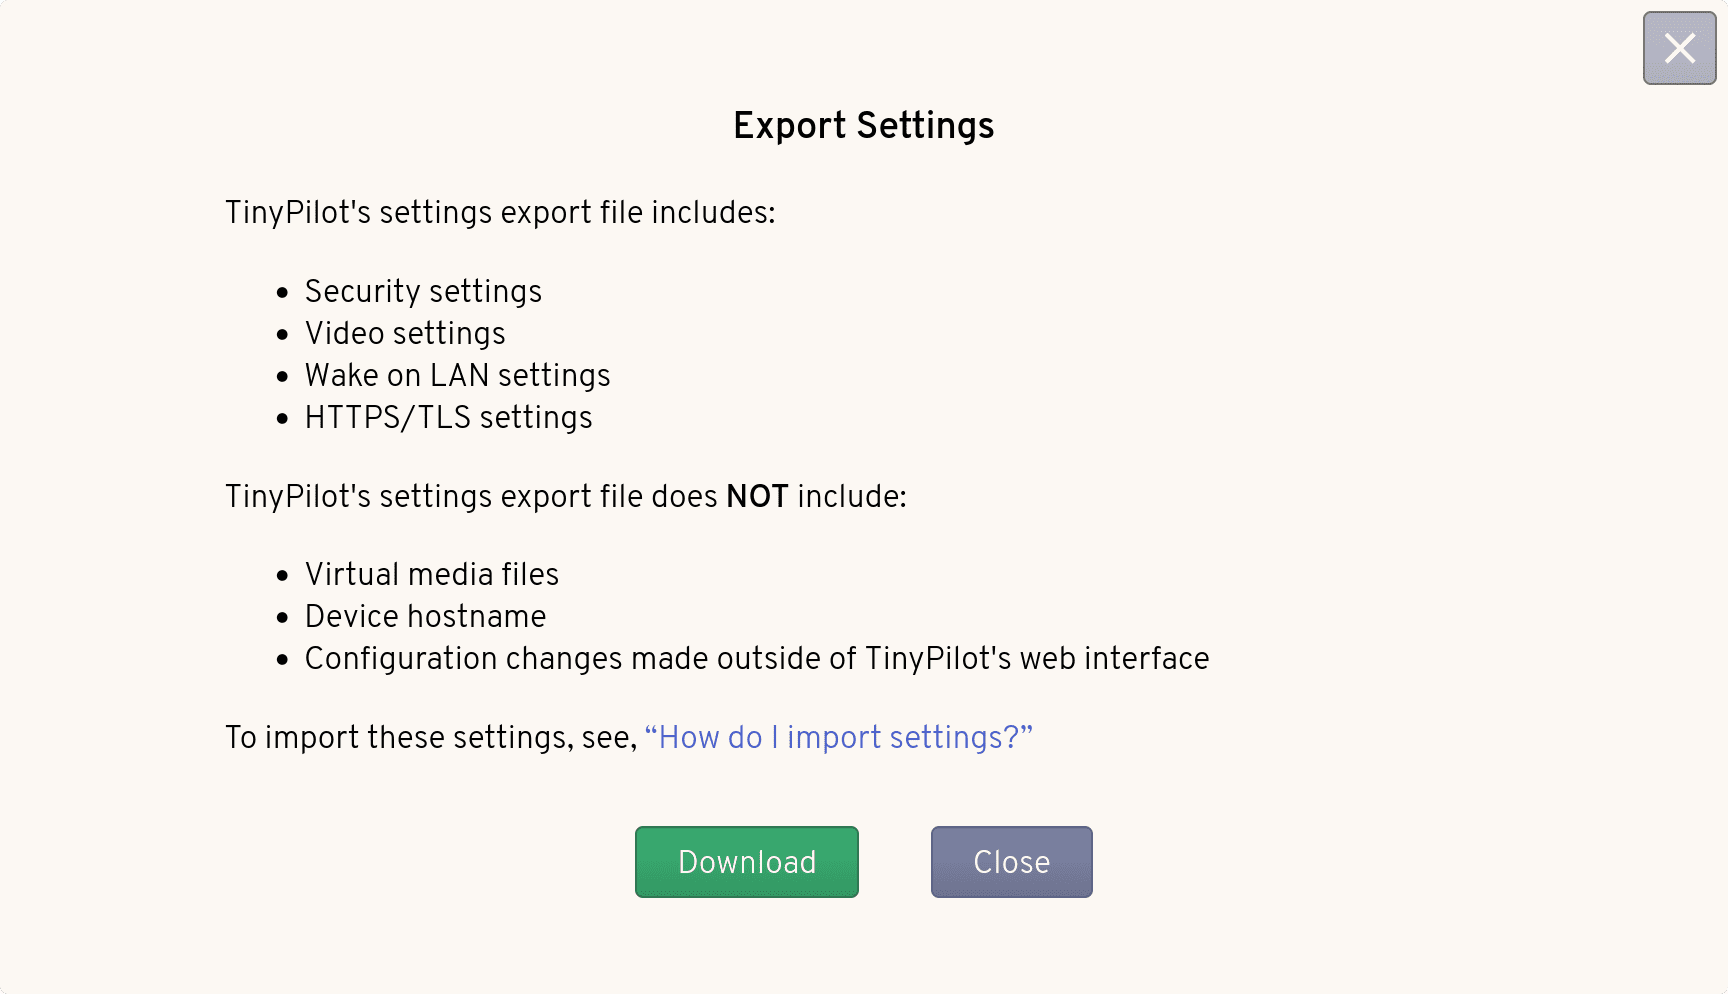 The 'Export Settings' UI prompts the user to download their TinyPilot settings export file.